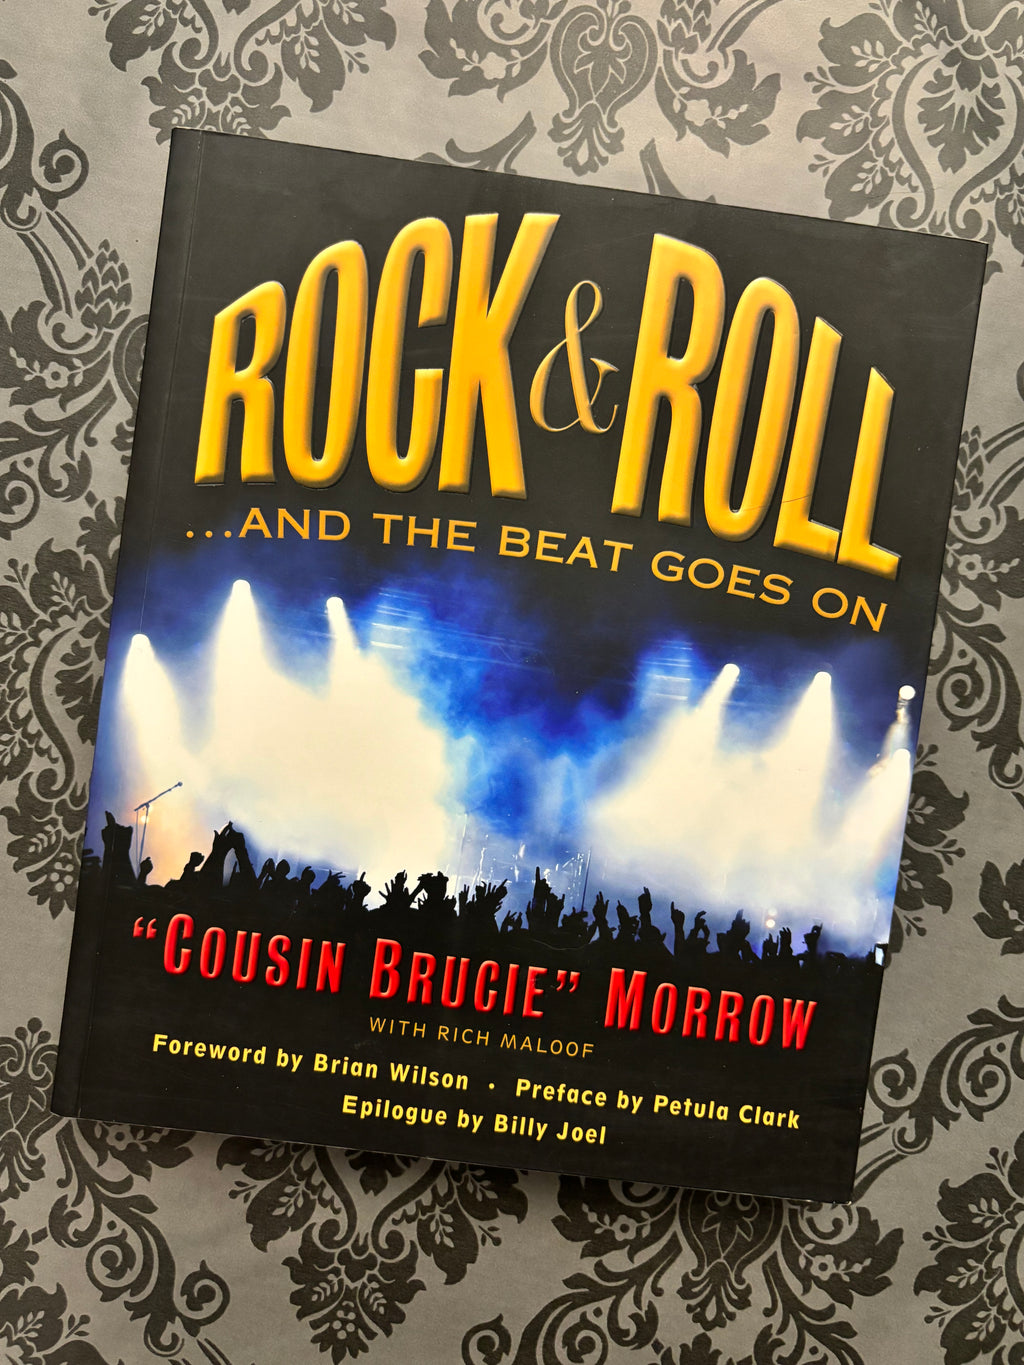 Rock & Roll...And the Beat Goes On- By "Cousin Brucie" Morrow